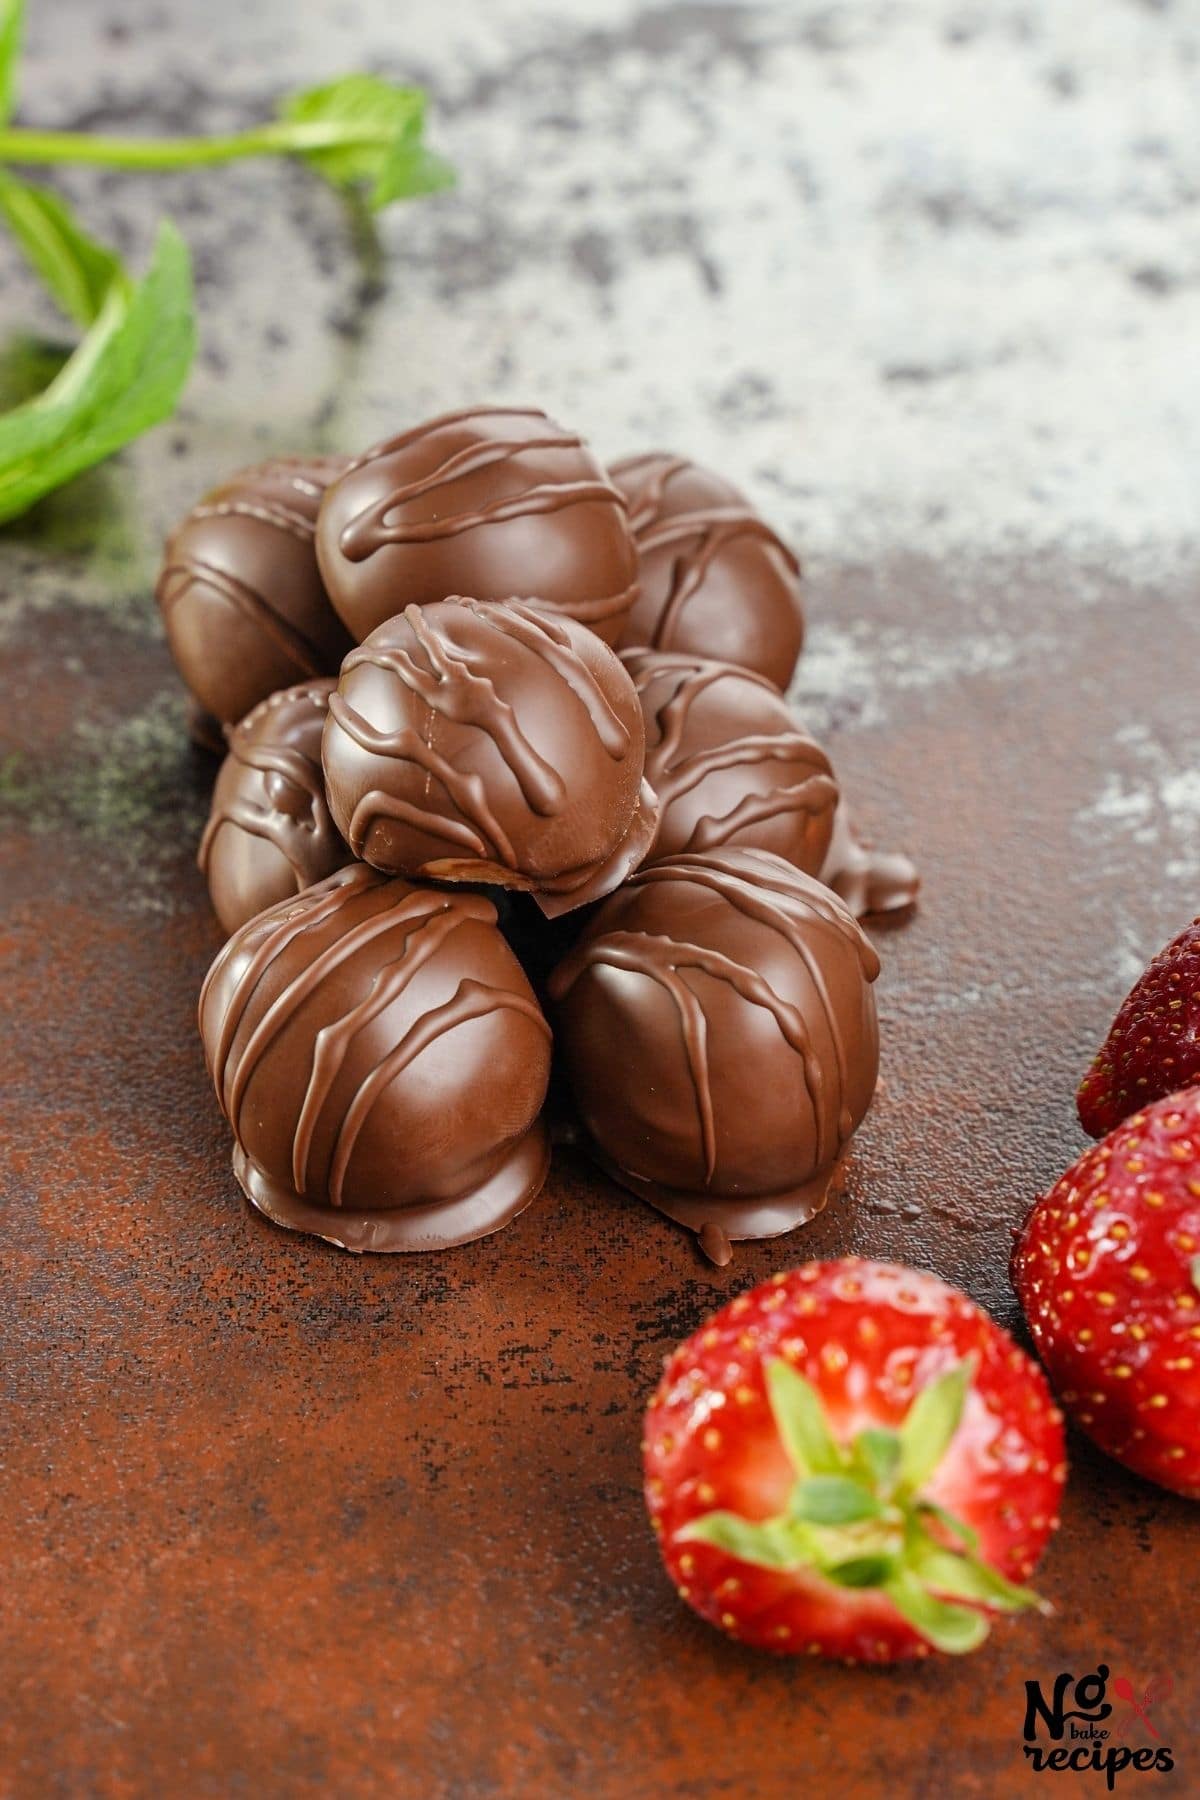 truffles stacked on table by strawberries